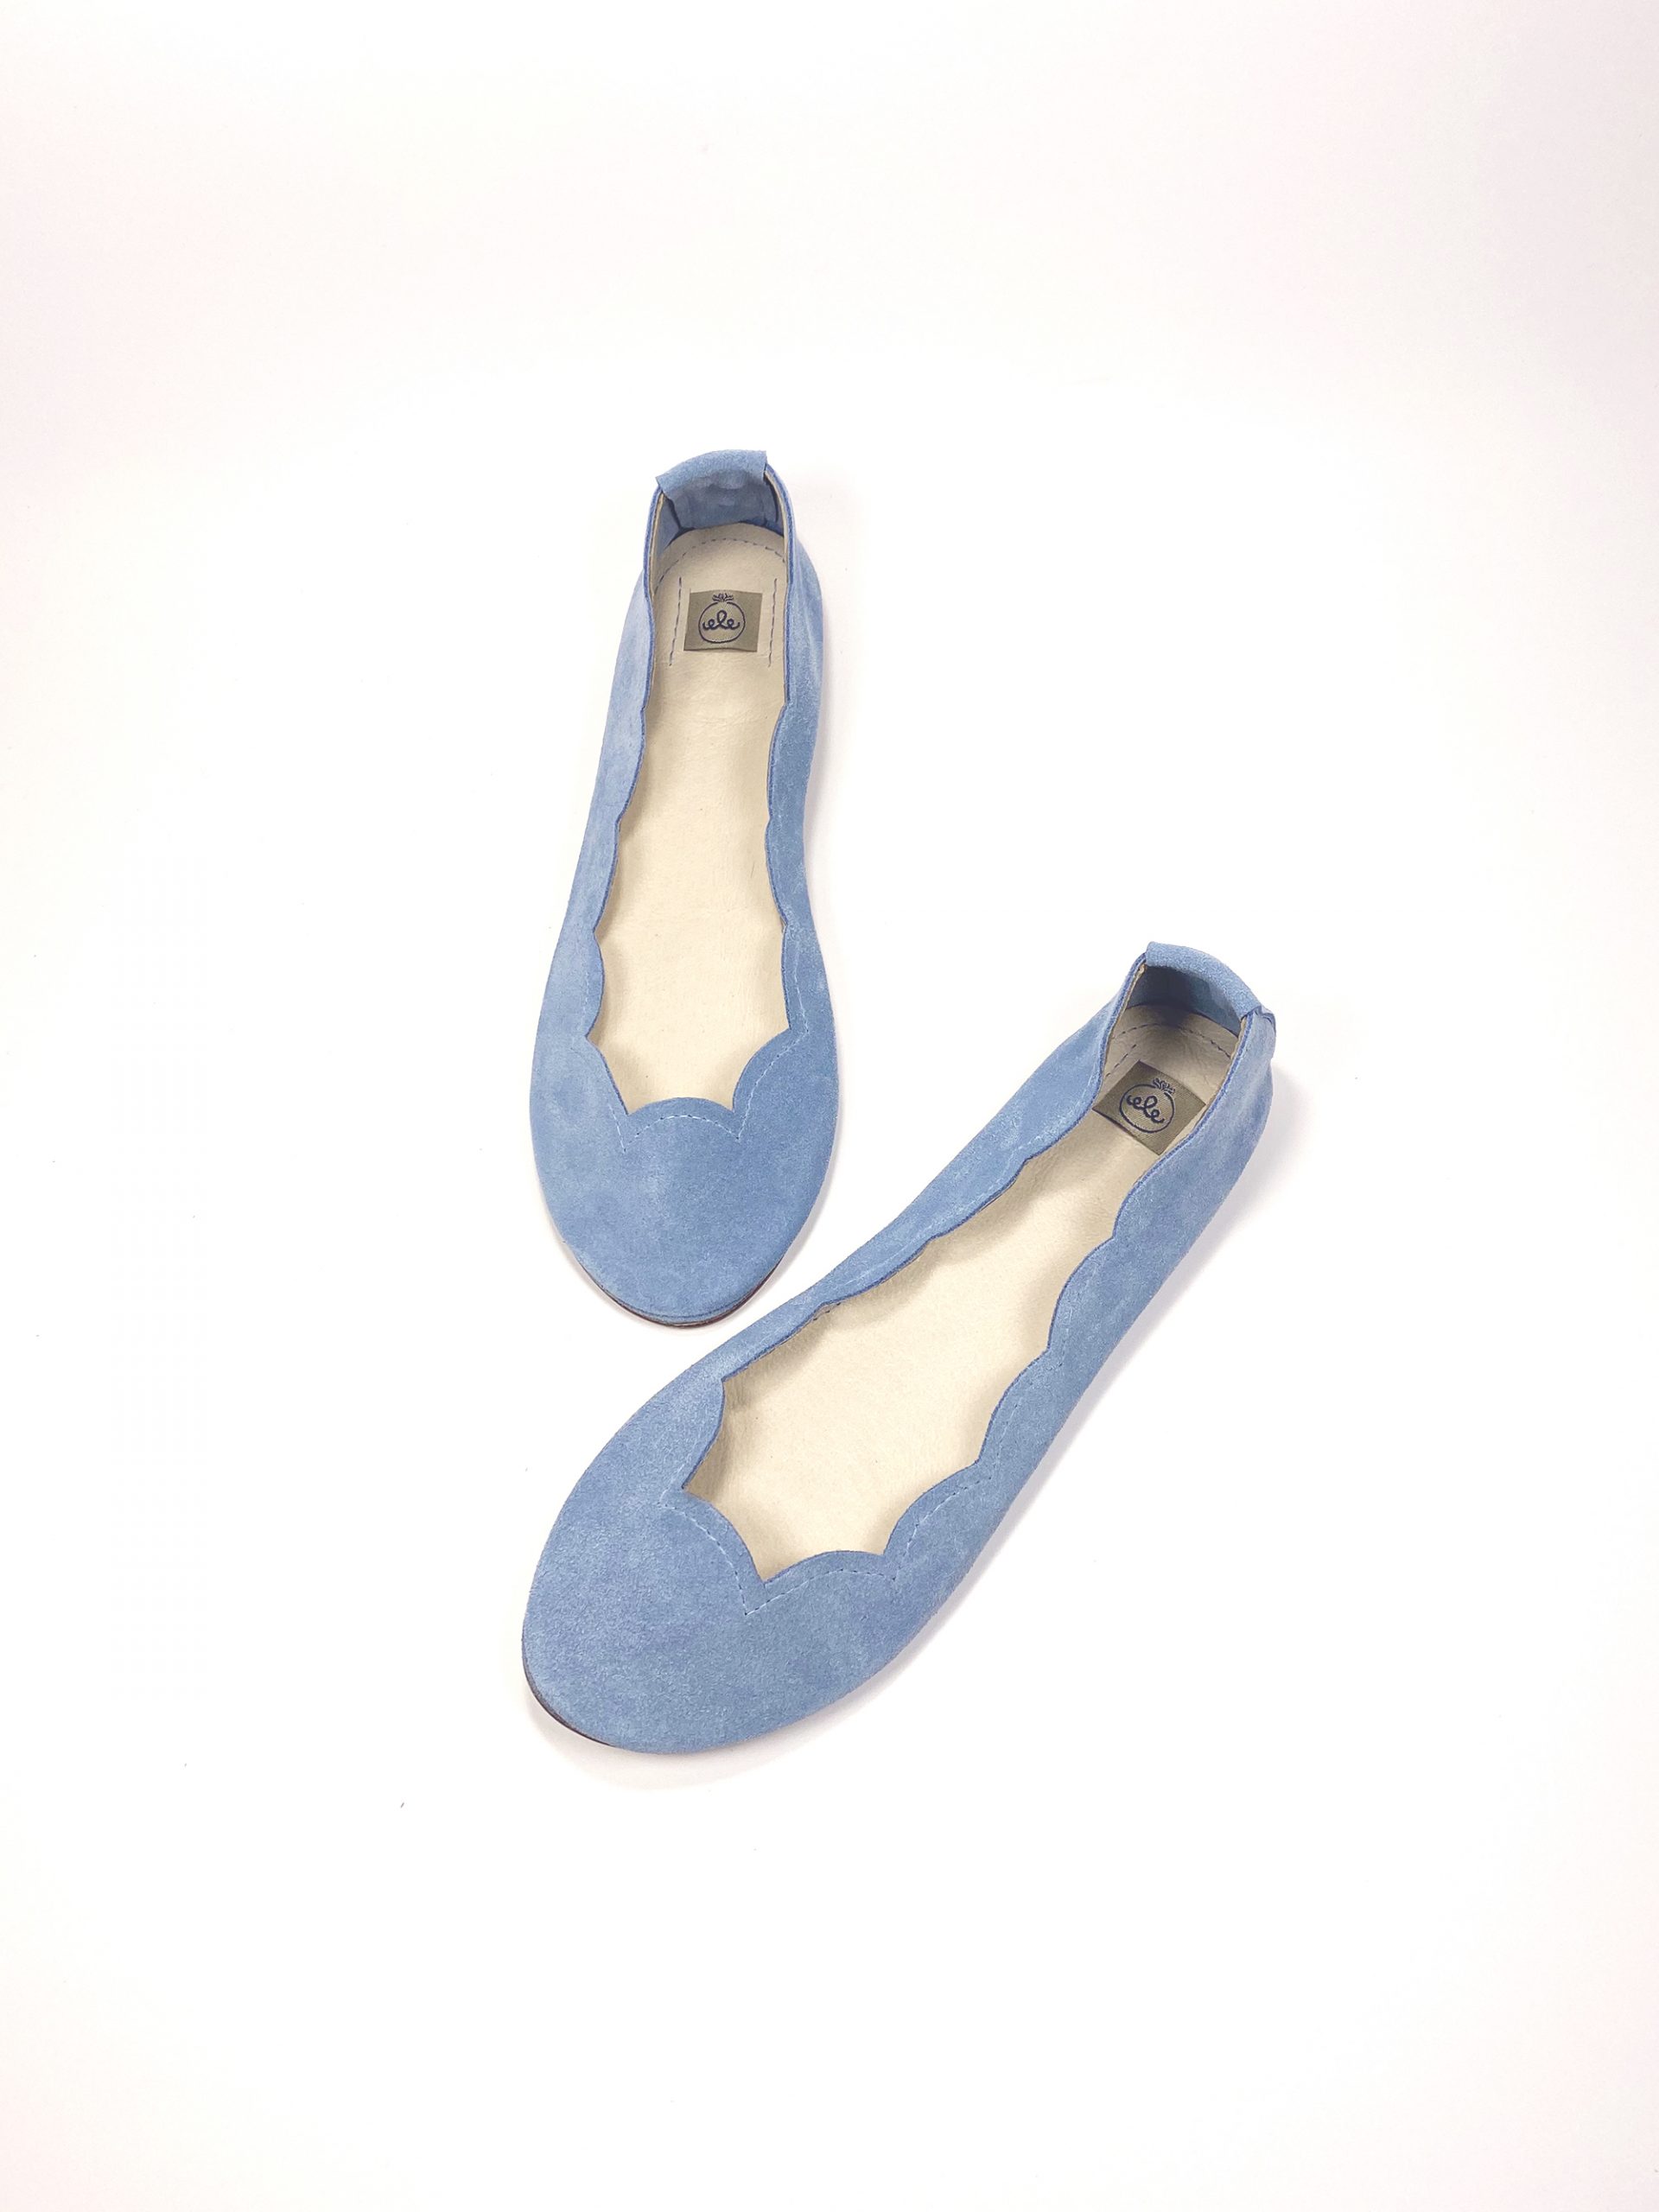 SCALLOPED ROUND FLATS IN SERENITY BLUE SOFT LEATHER — Ele Handmade Shoes